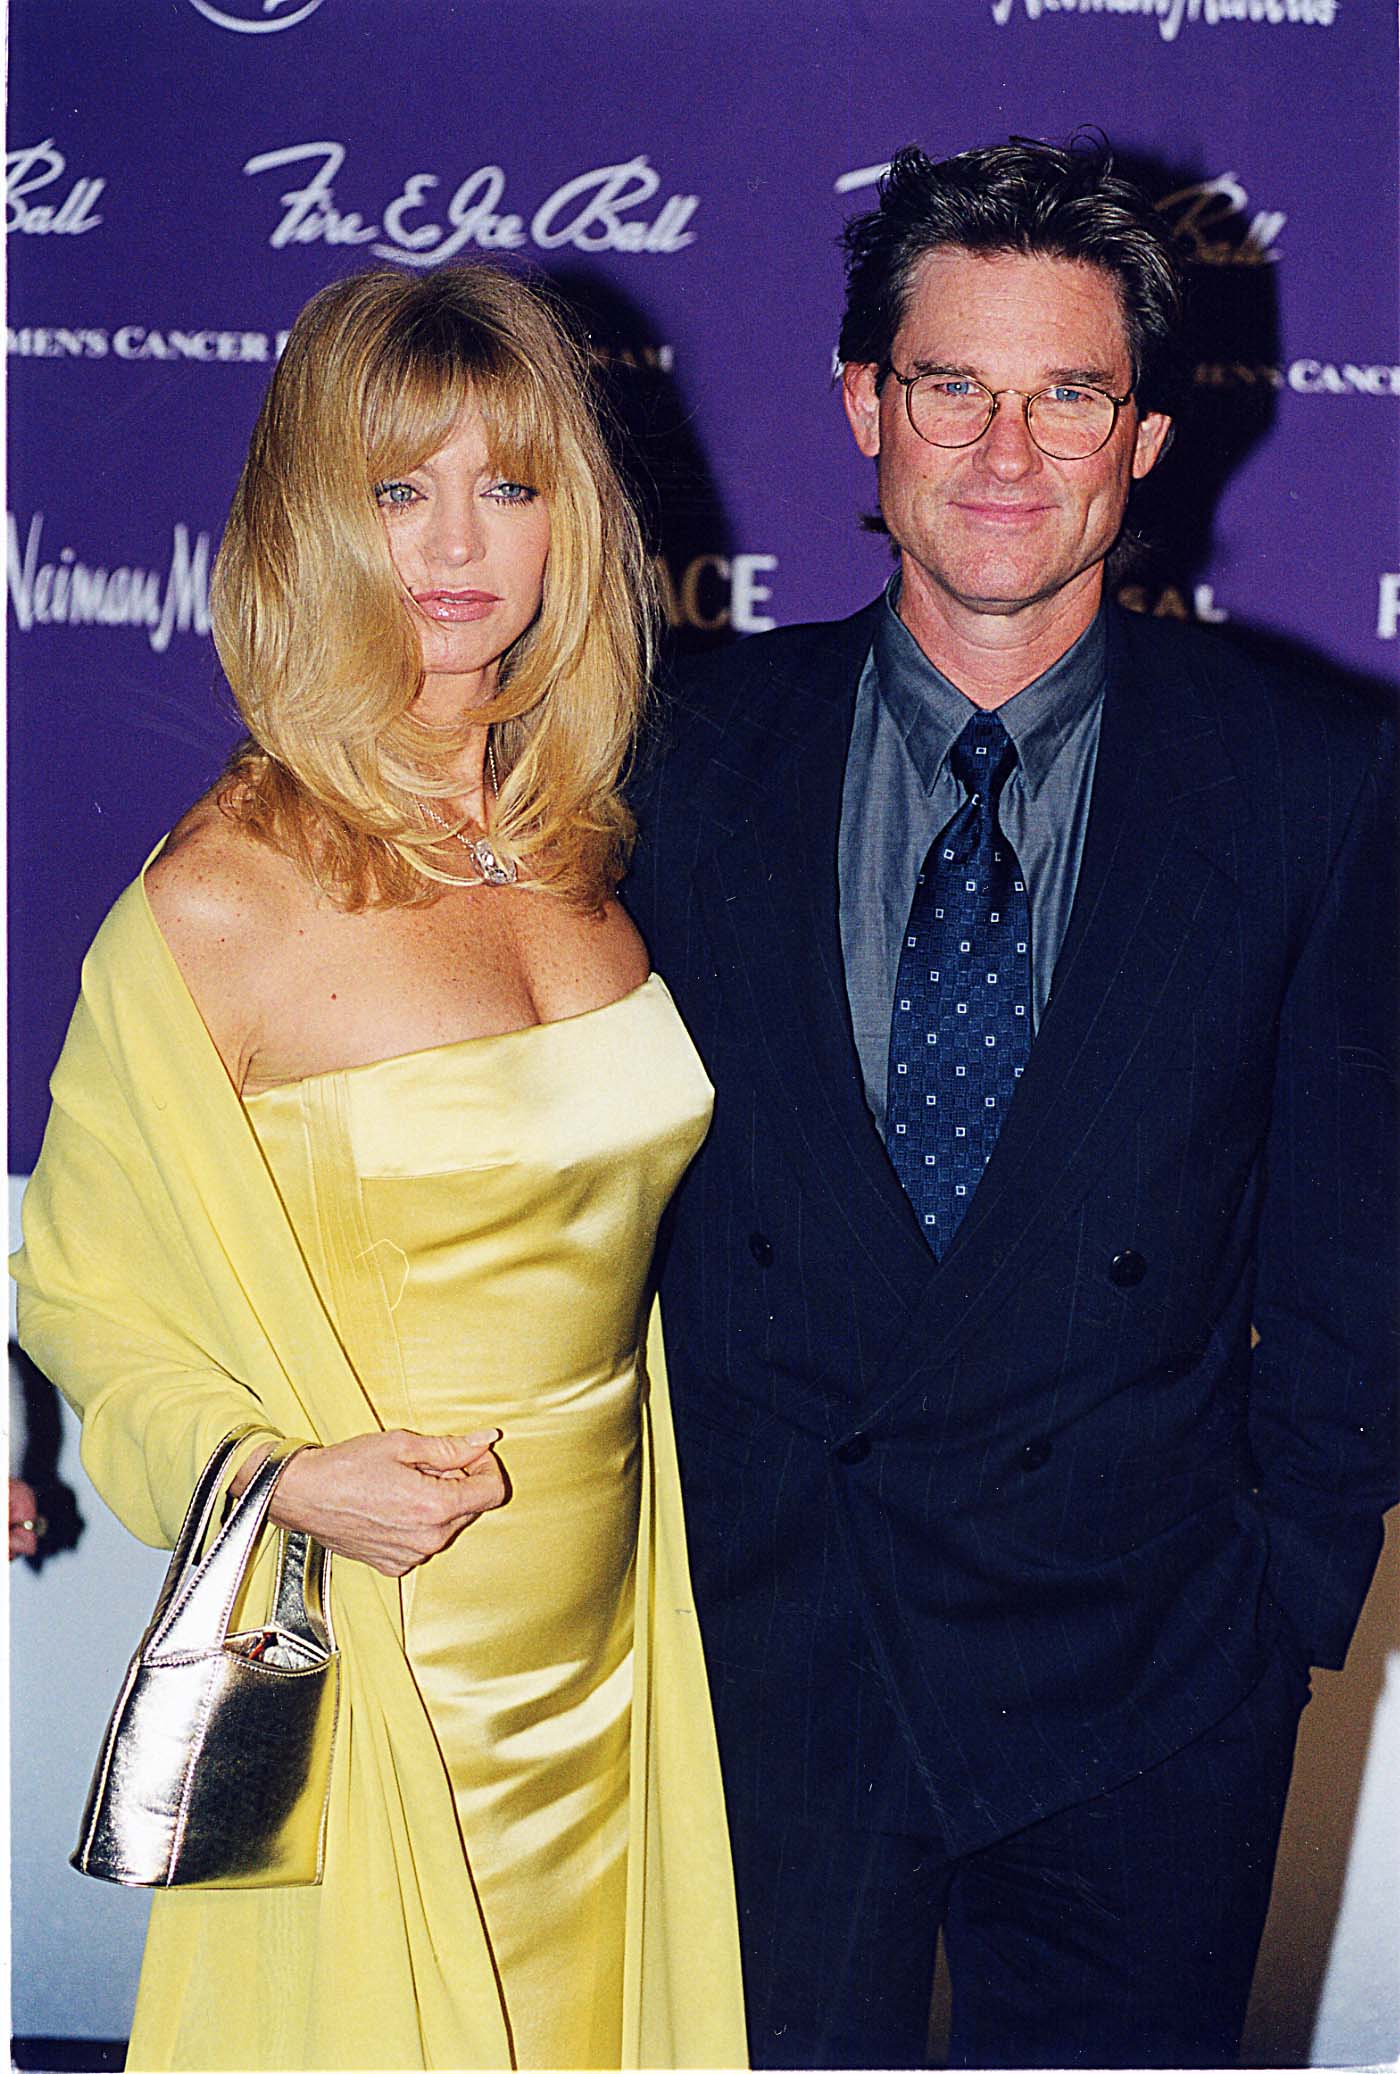 Goldie Hawn and Kurt Russell in Los Angeles, 1998. | Source: Getty Images